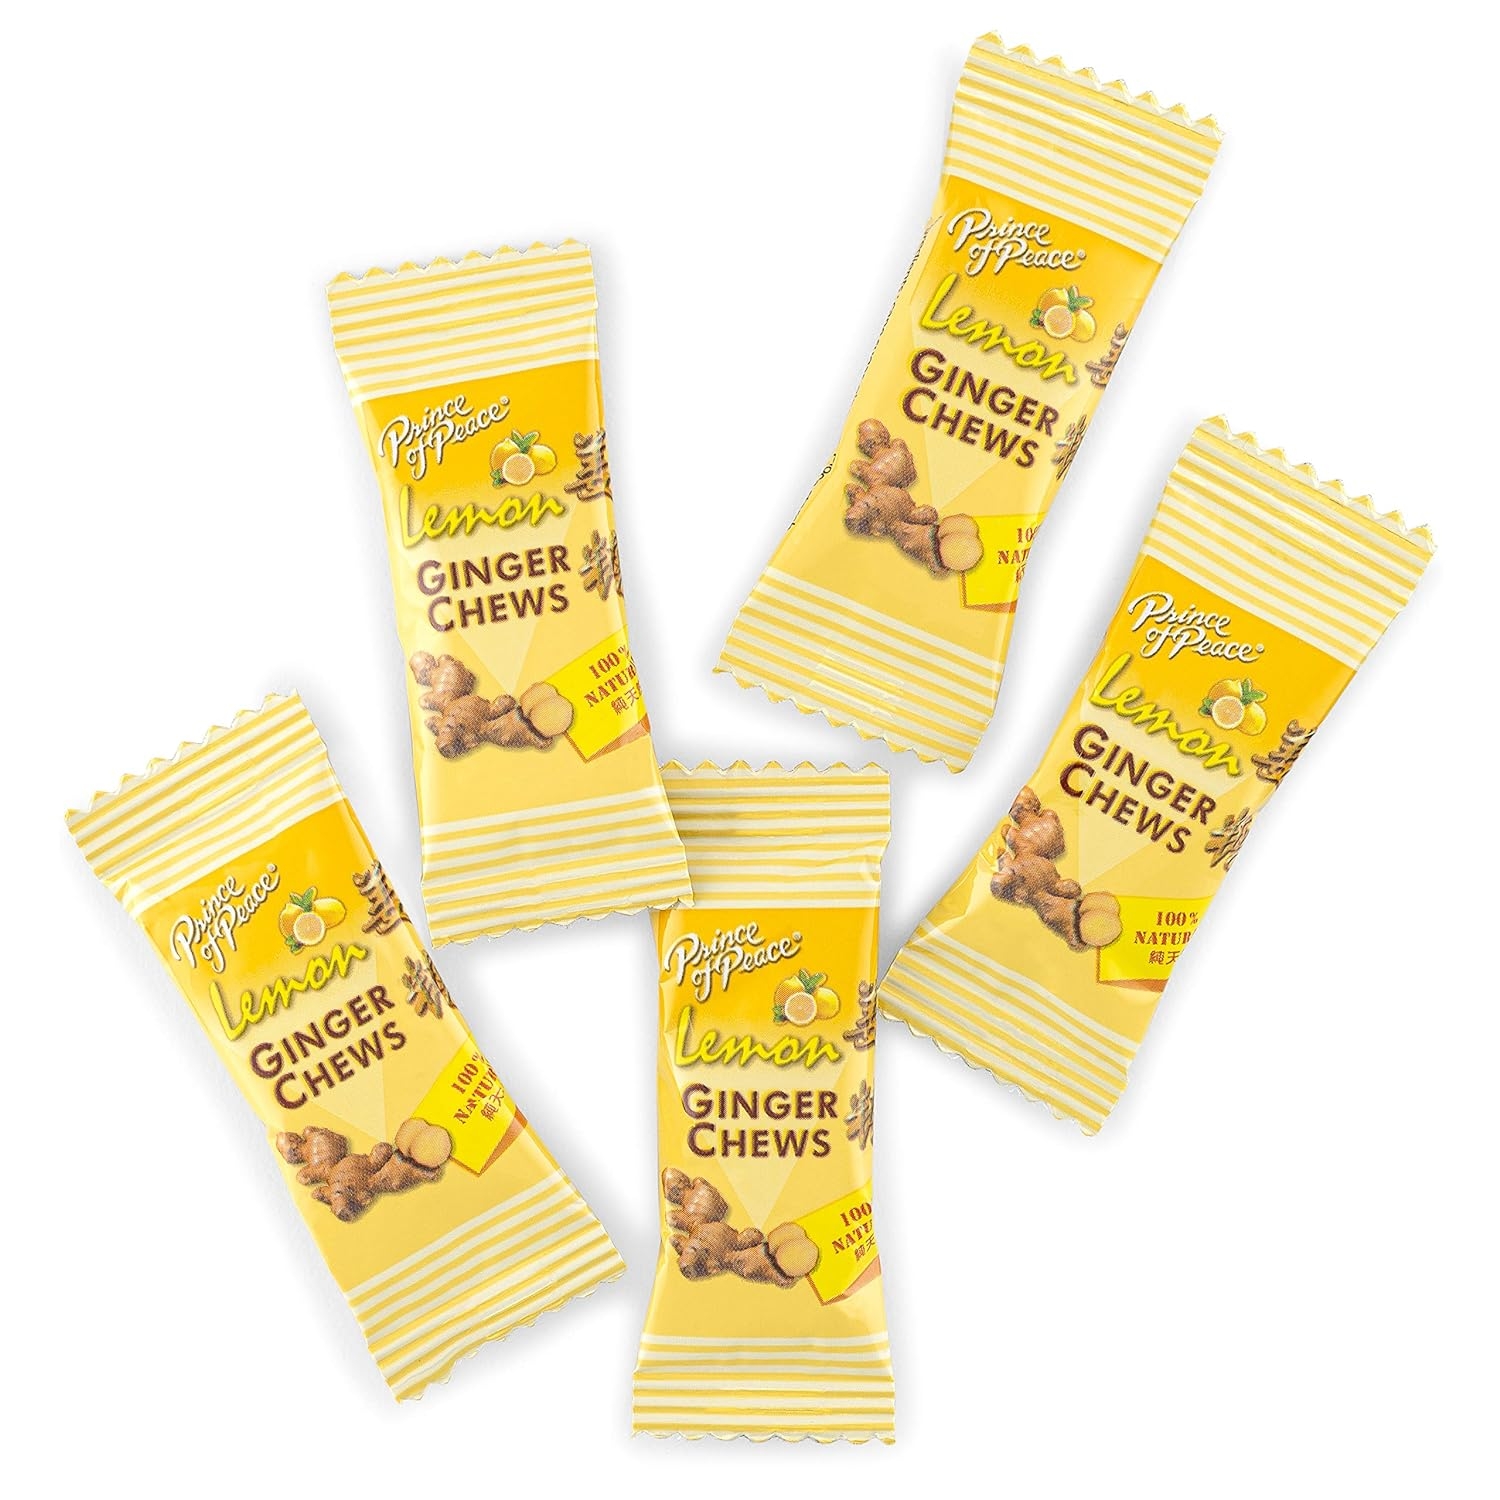 Prince of Peace Ginger Chews With Lemon, 4 oz. – Candied Ginger – Lemon Candy – Lemon Ginger Chews – Natural Candy – Ginger Candy for Nausea